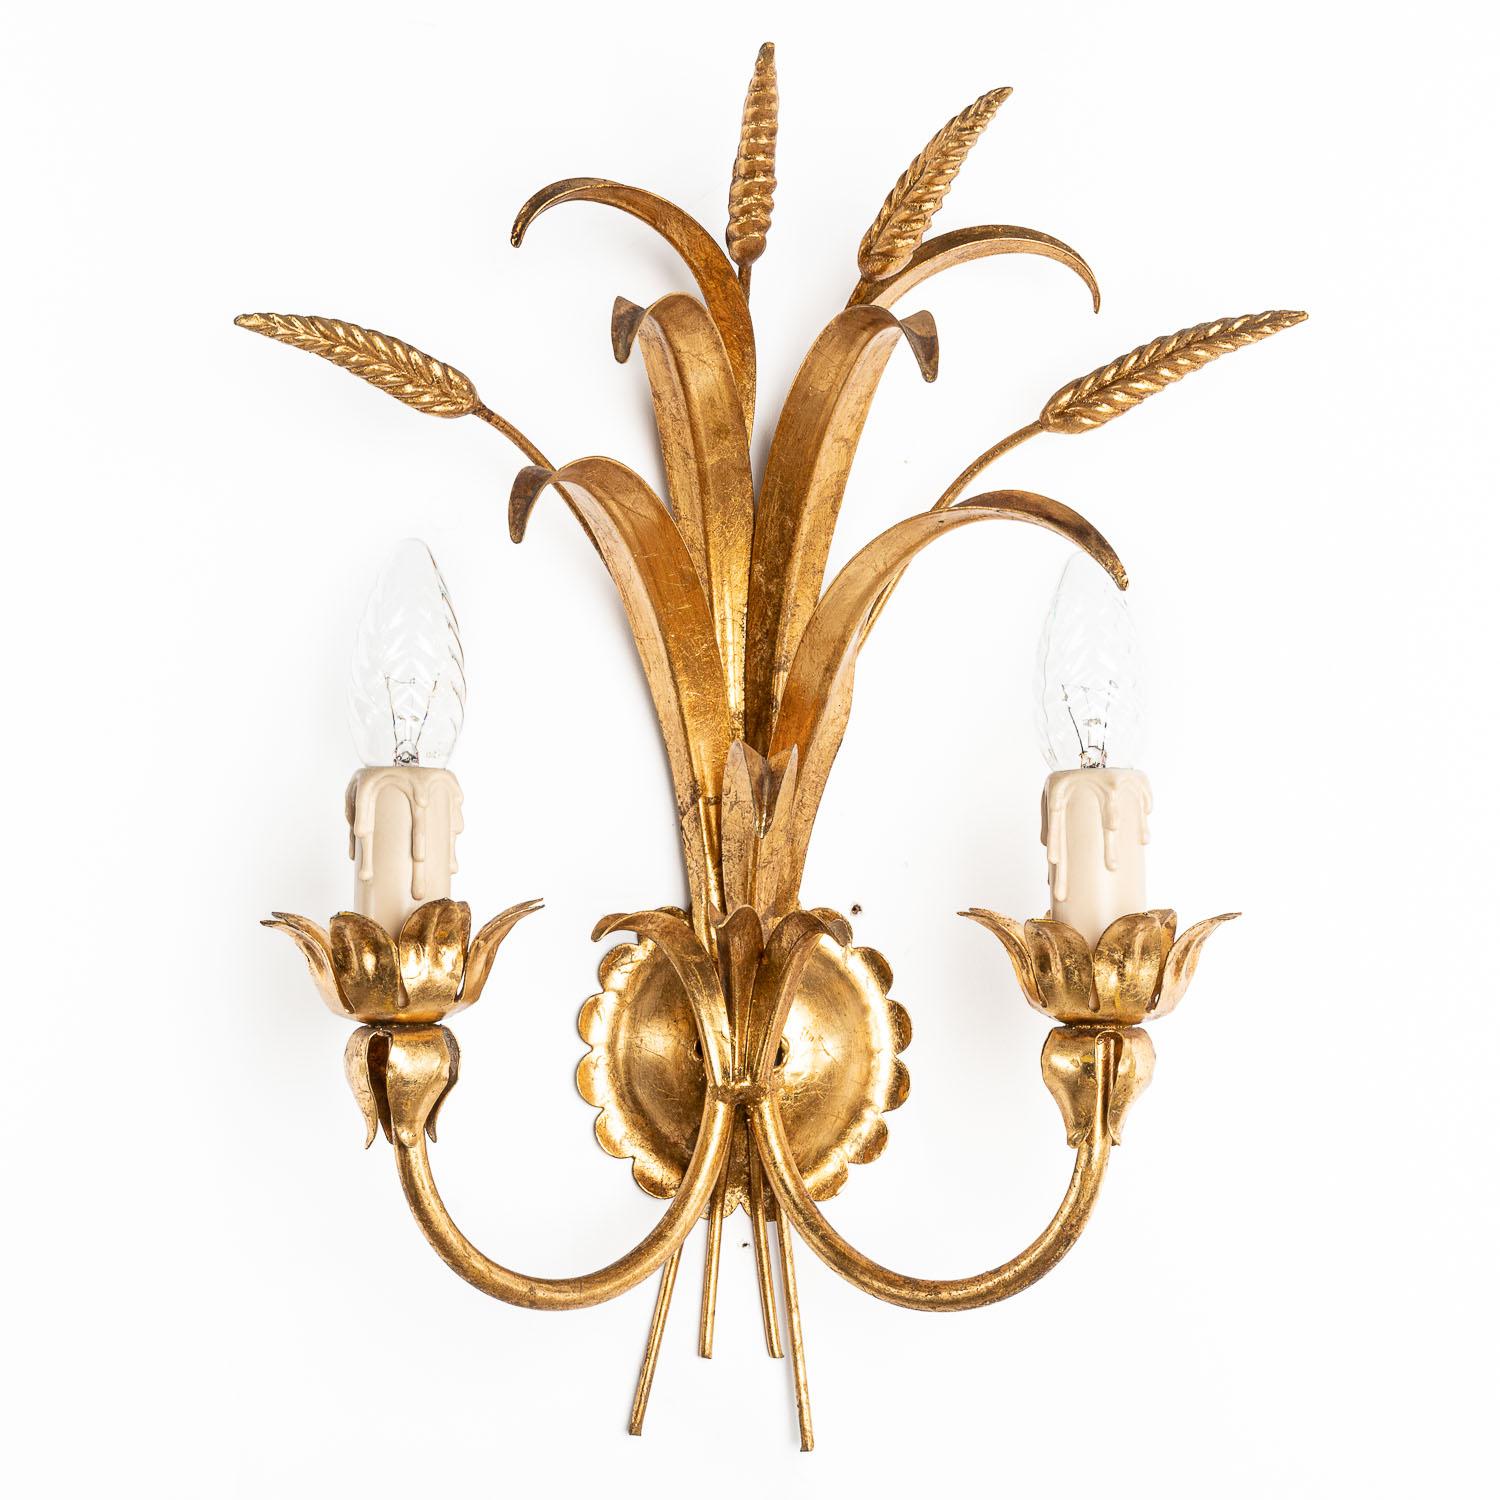 Iconic gilt metal leaf lighting each E14 fittings. We have more similar lighting in stock, if interested please do contact us for more information.